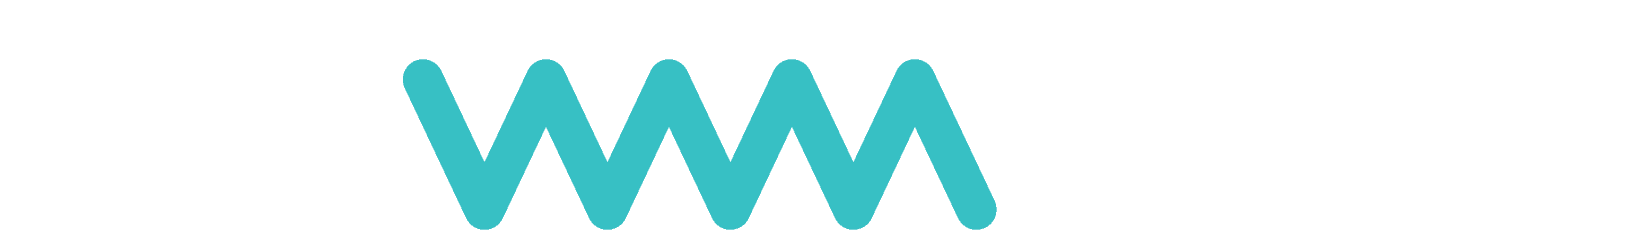 Flowmailer logo white and teal